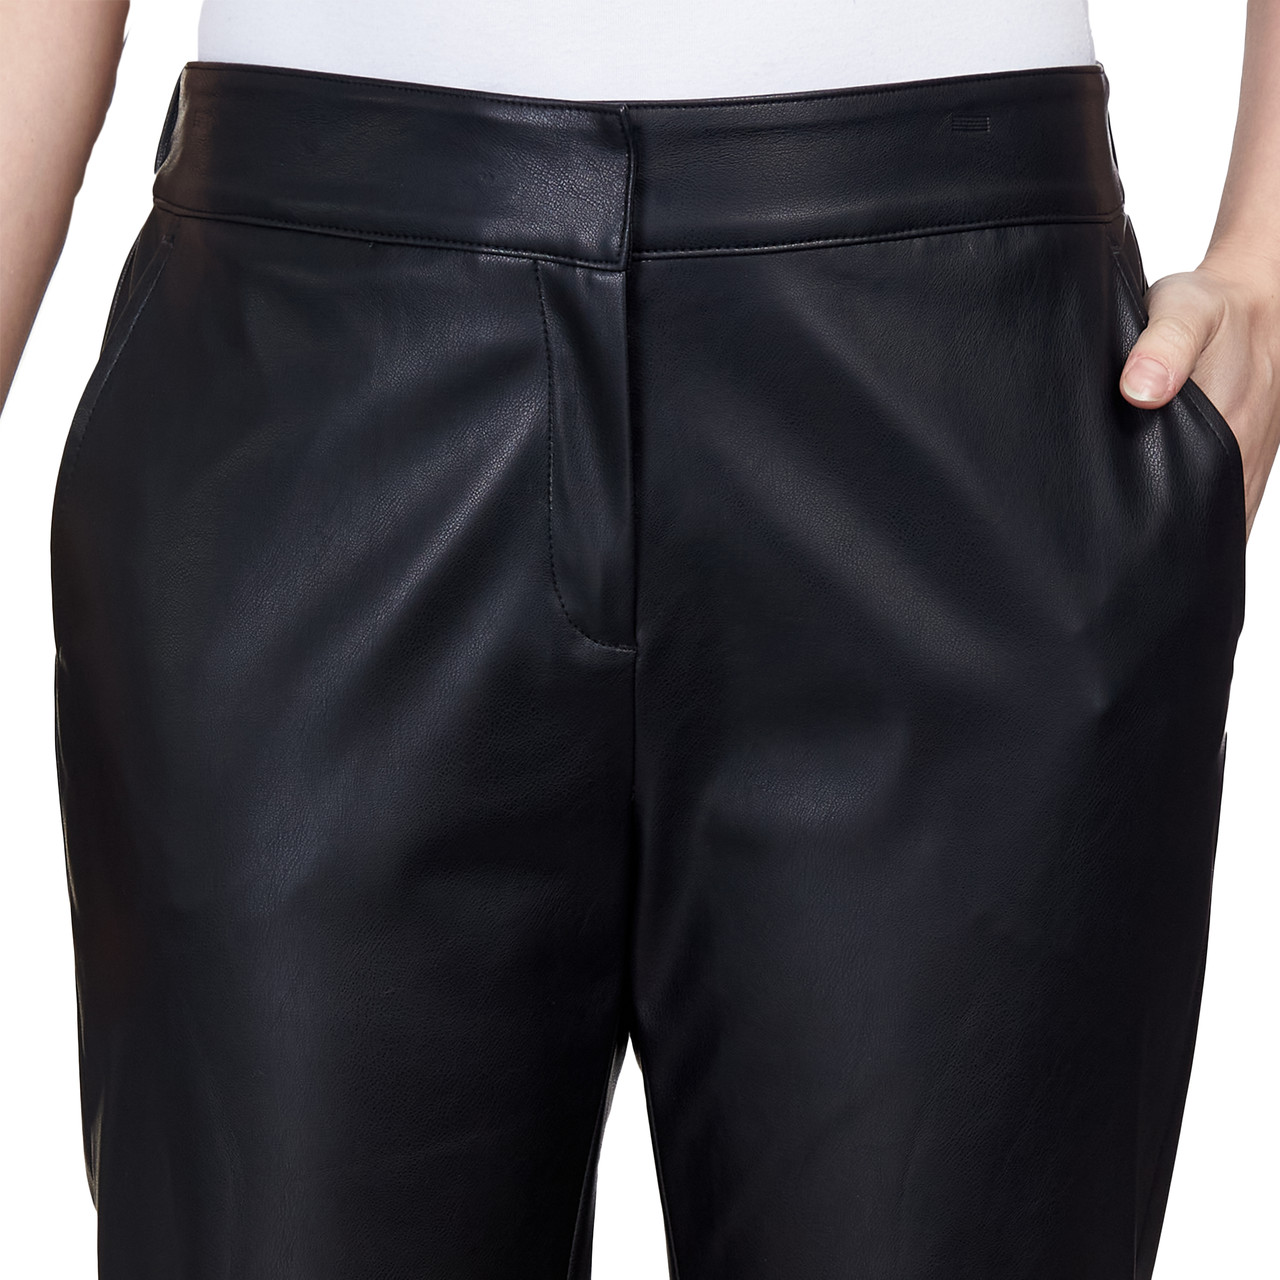 Petite Women's Faux Leather Pull On Pant